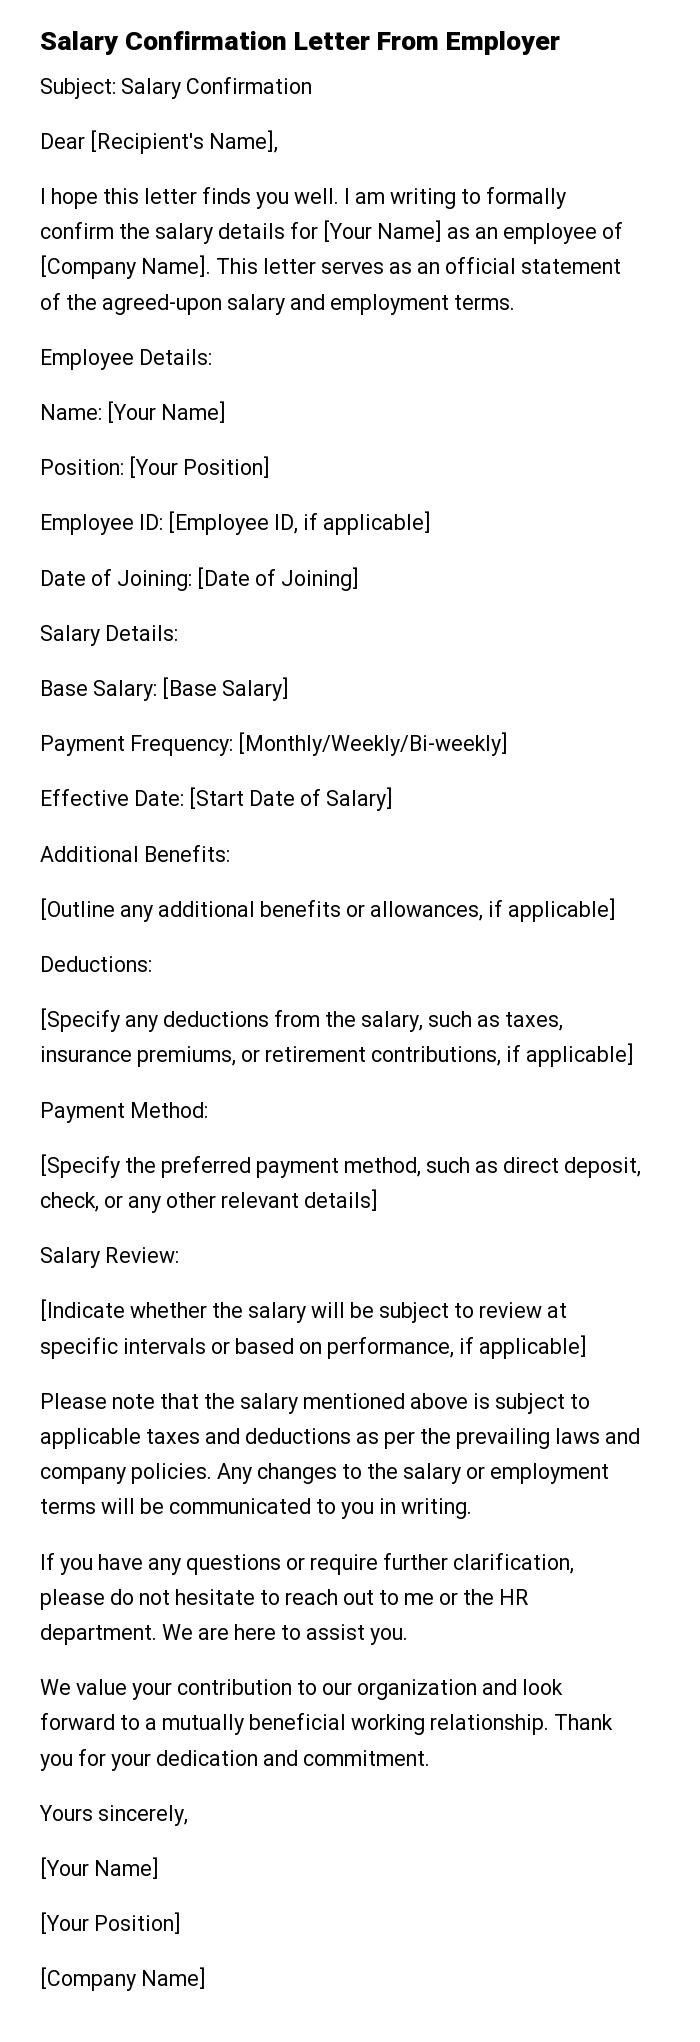 Salary Confirmation Letter From Employer